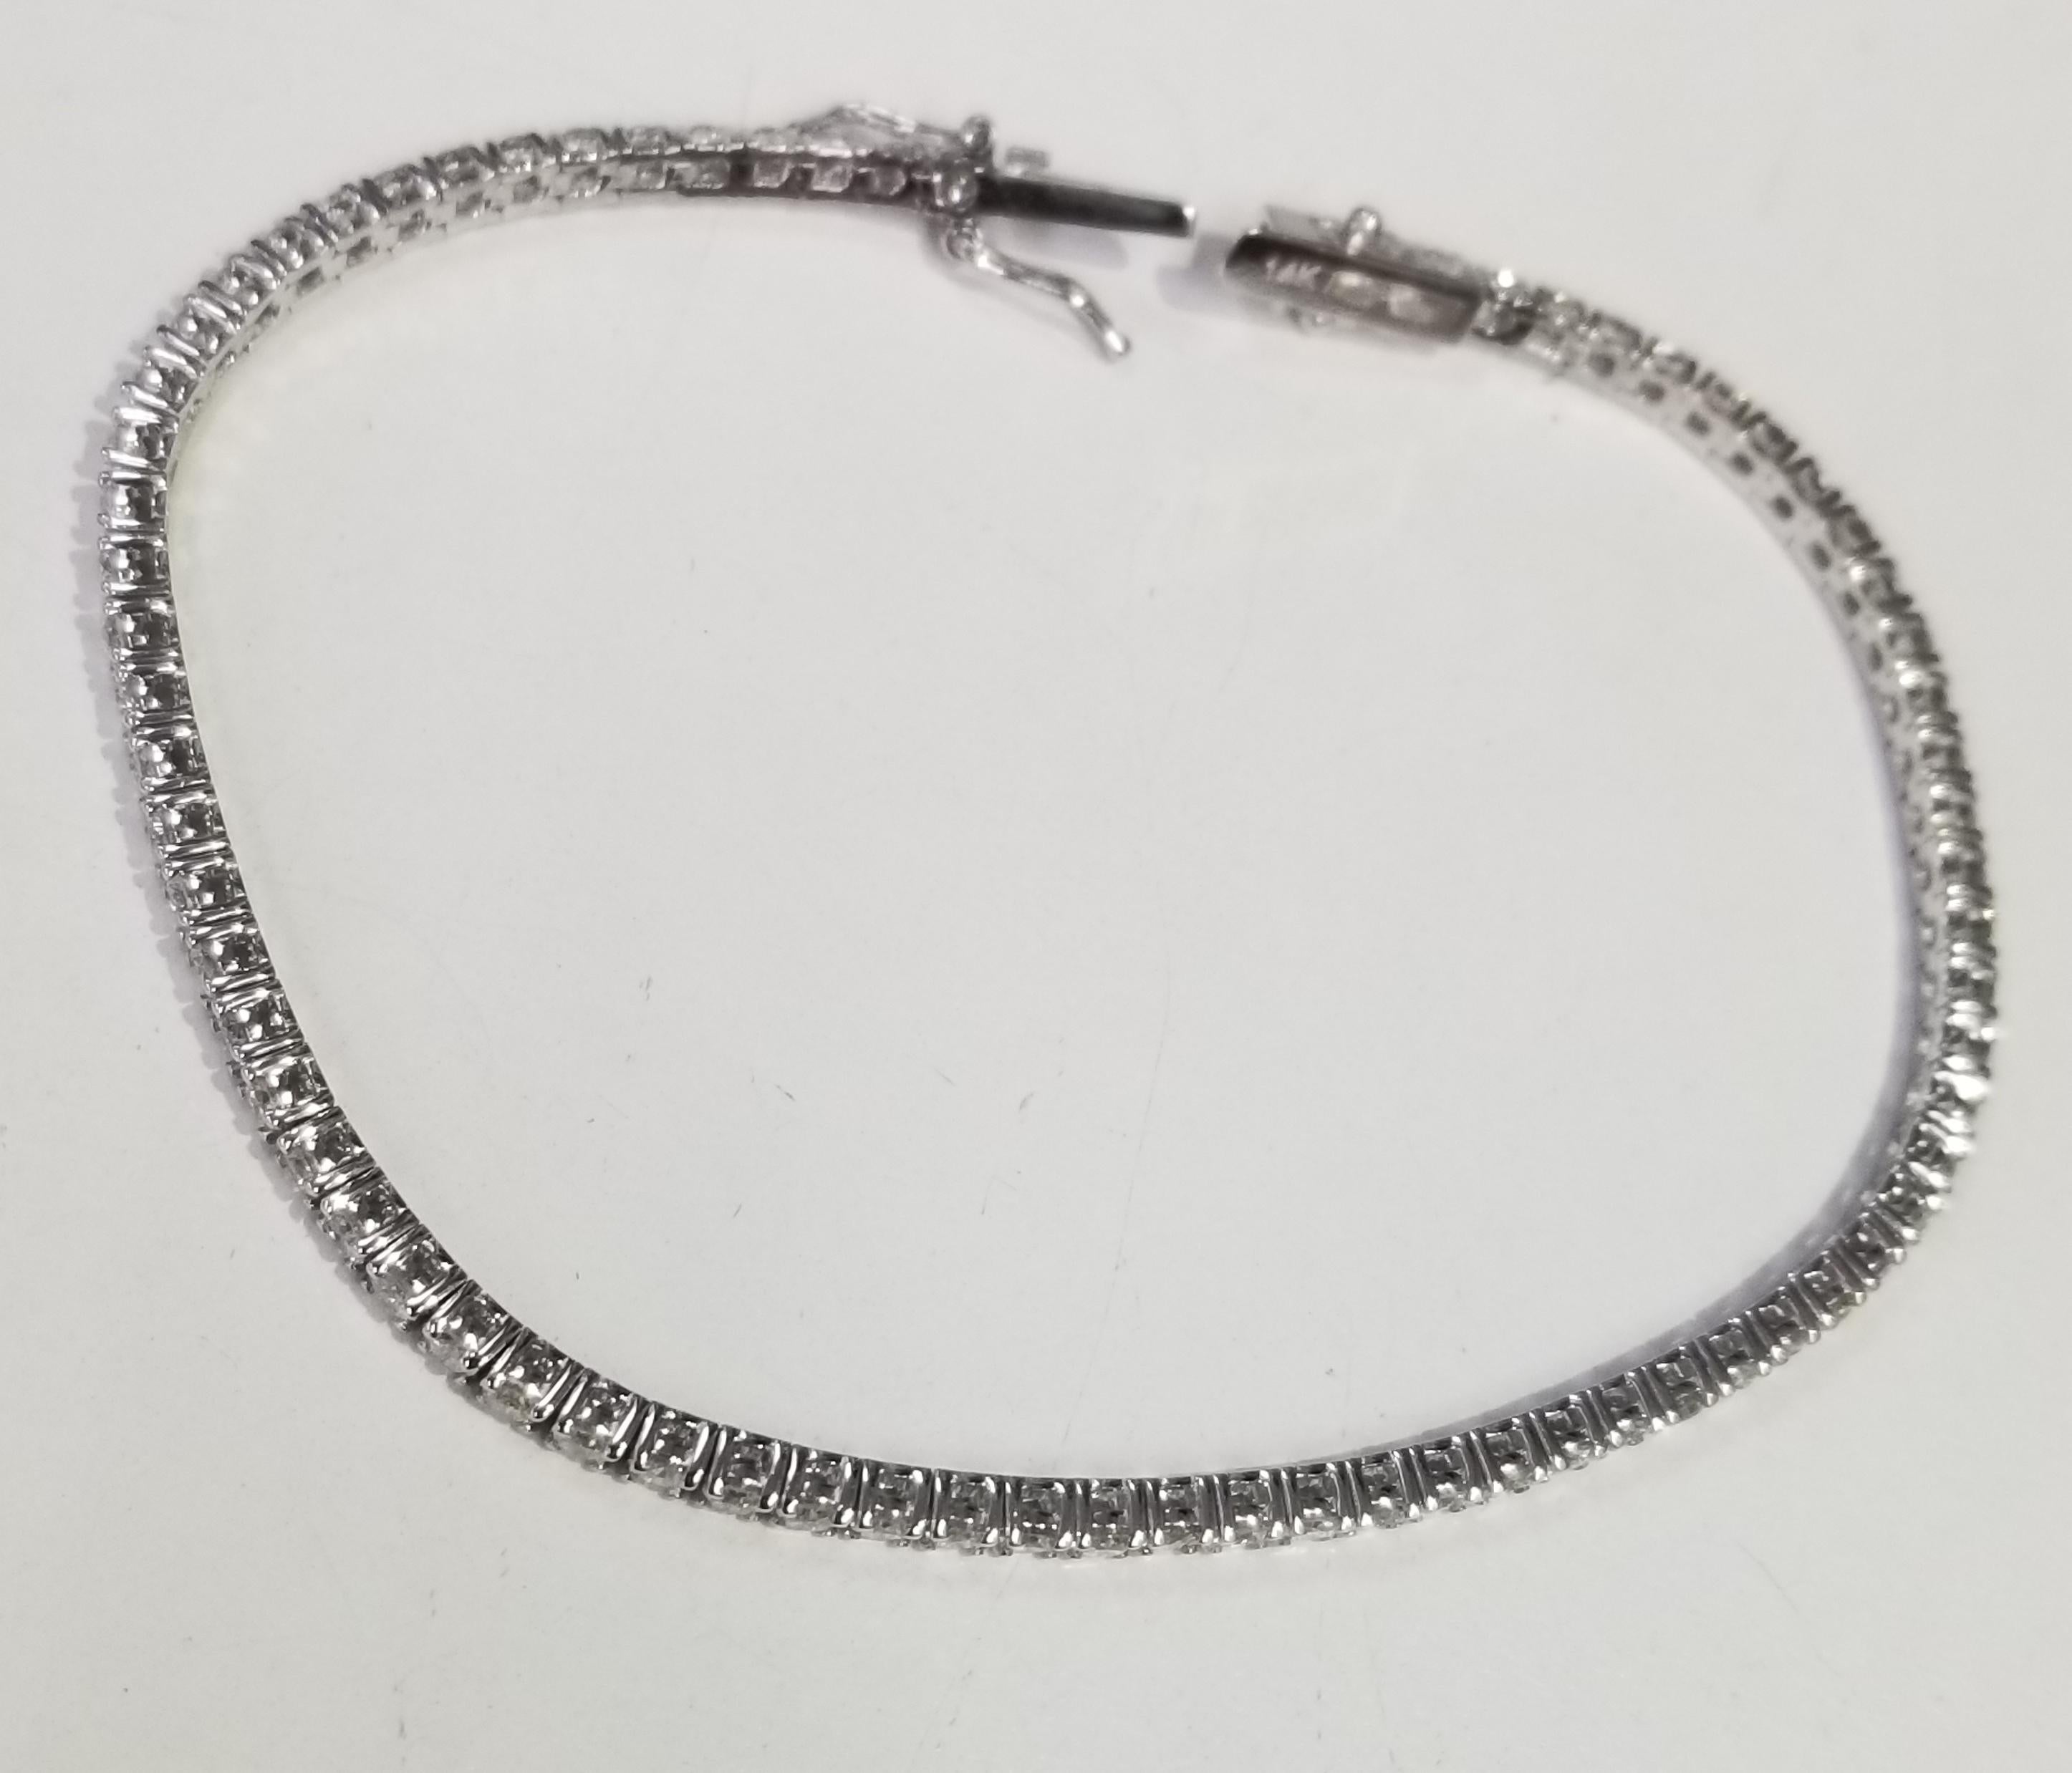 This is very beautiful 14k white gold custom made tennis bracelet with 75 round diamonds color F-G and clarity SI1 weighing 3.01cts. very fine quality diamonds, bracelet measures 7 inches with clasp and safety.
Specifications:
main stone: ROUND